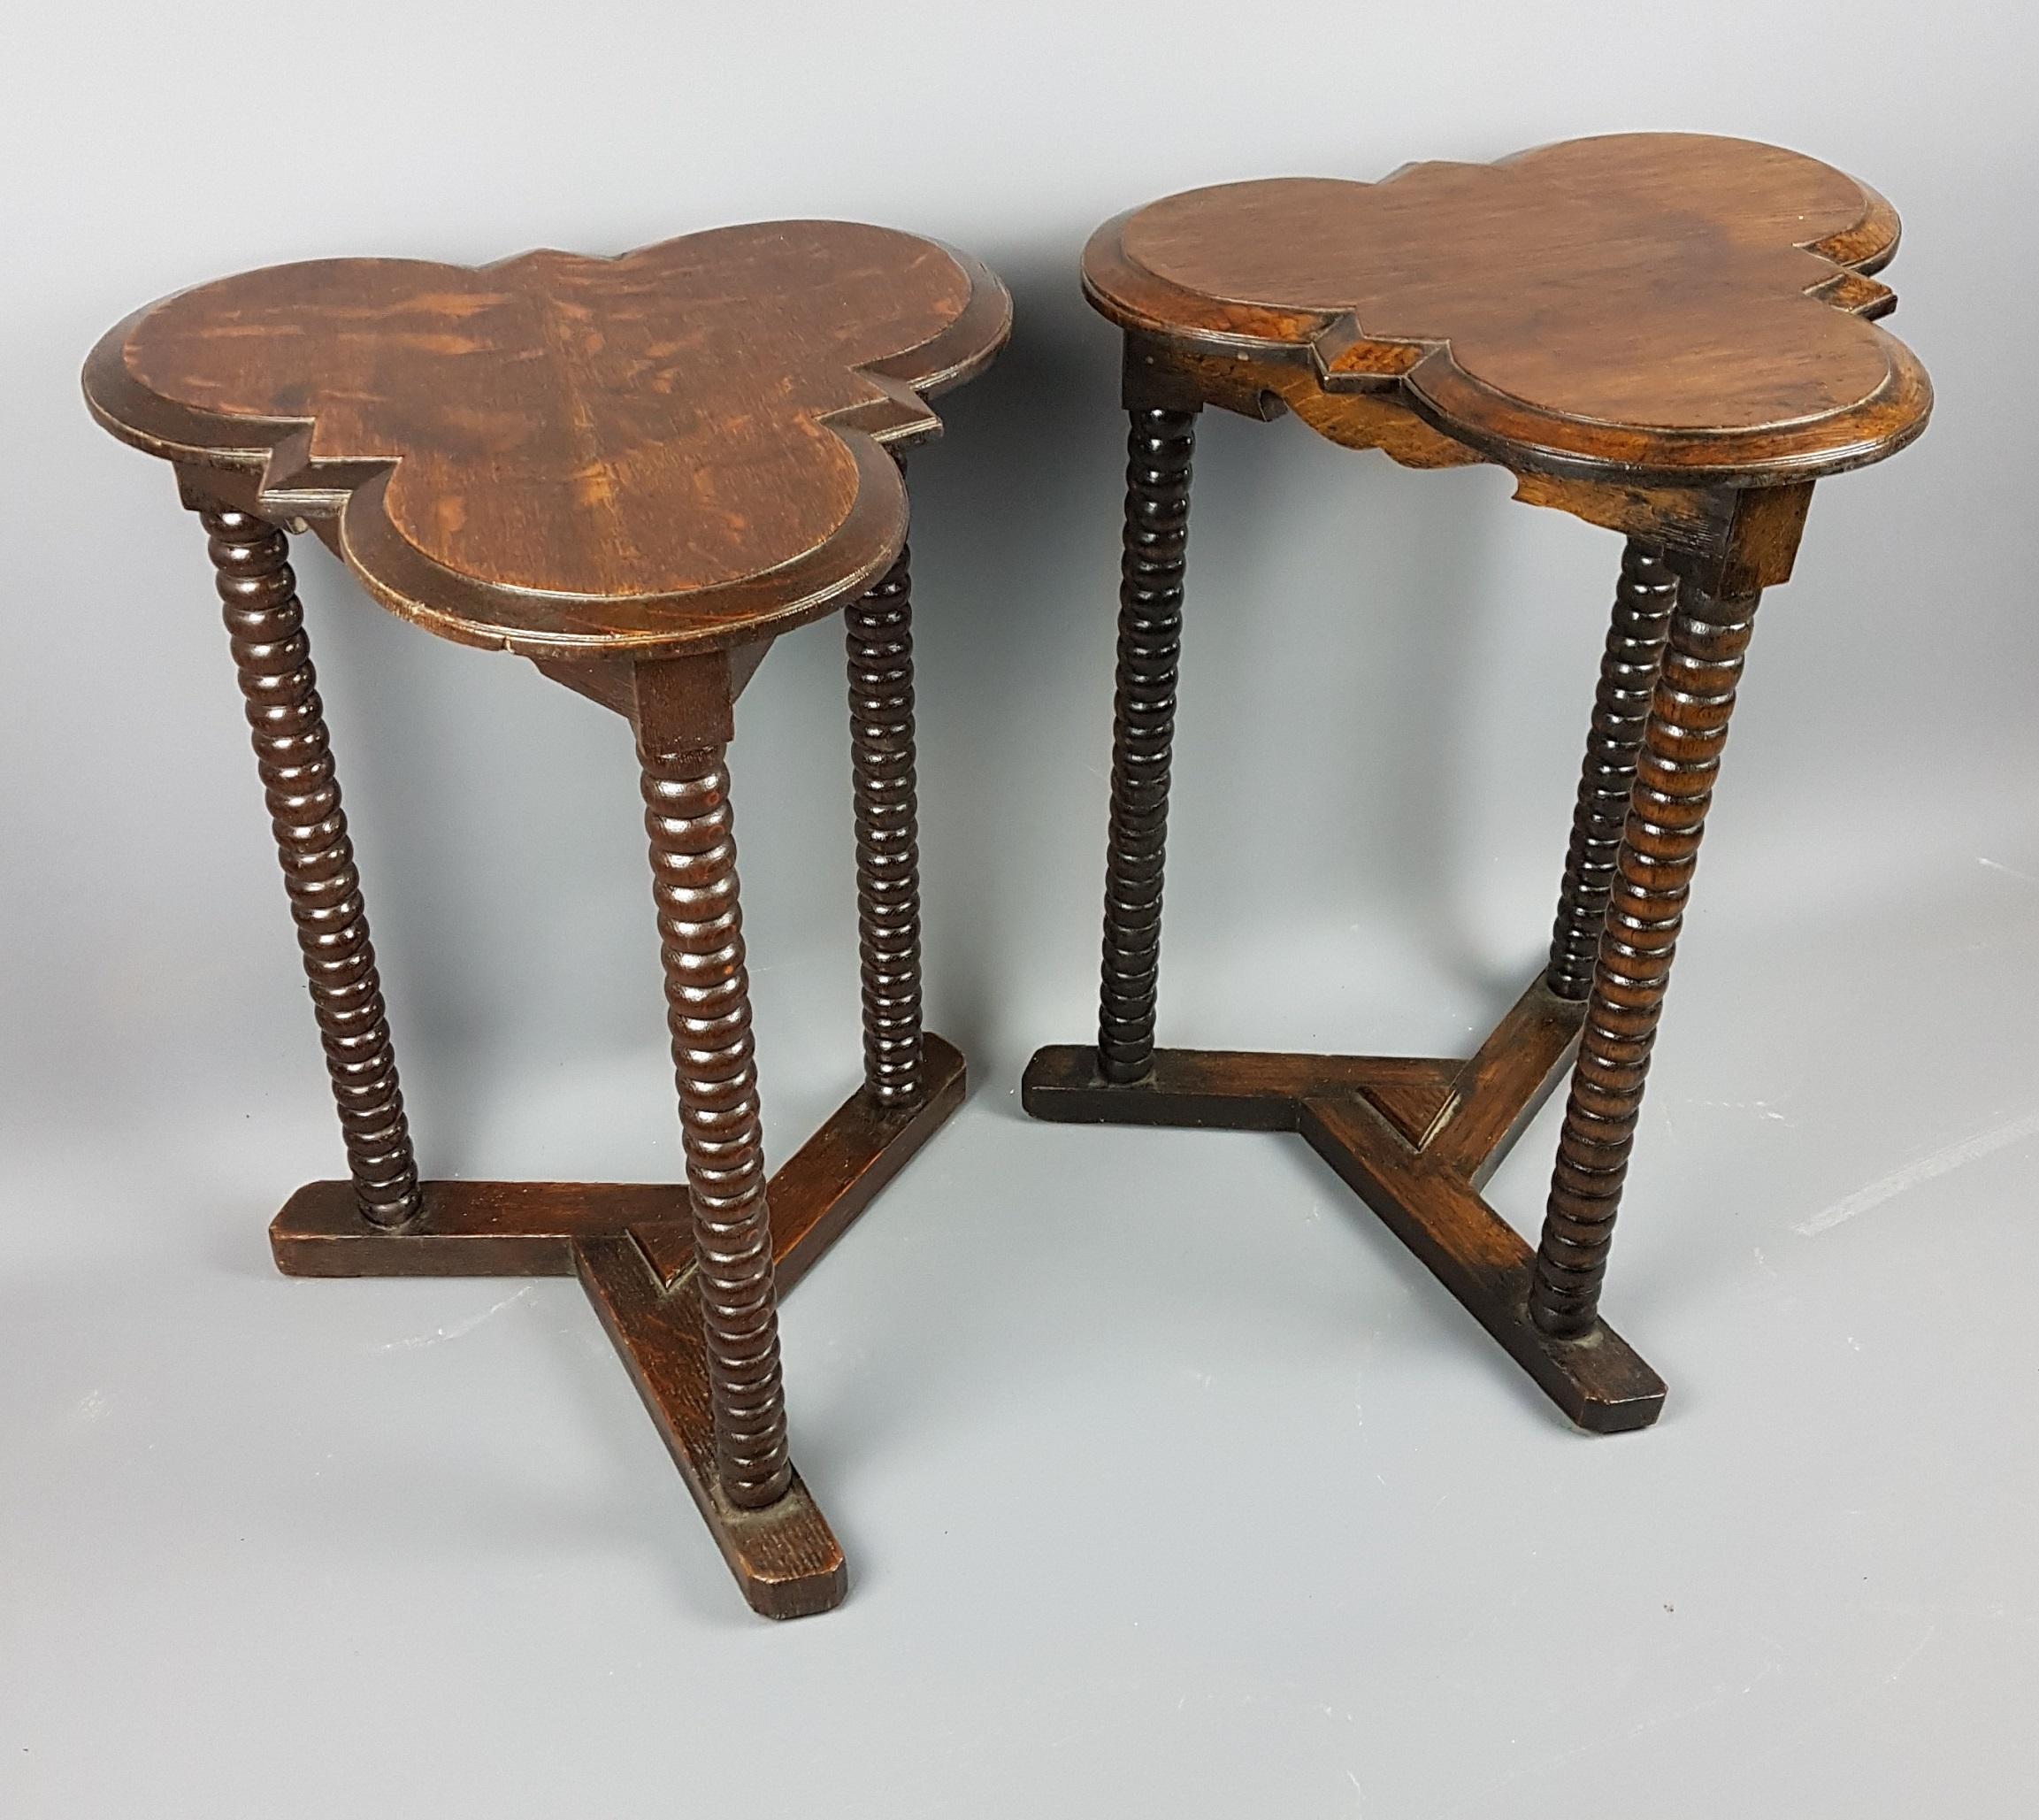 A great pair of solid oak arts and crafts style bobbin turned tables with stylized cloverleaf tops to them and unusual tri-formed stretcher base. They are from the 1920s and for the tops they have used a great cut of the oak which shows off the